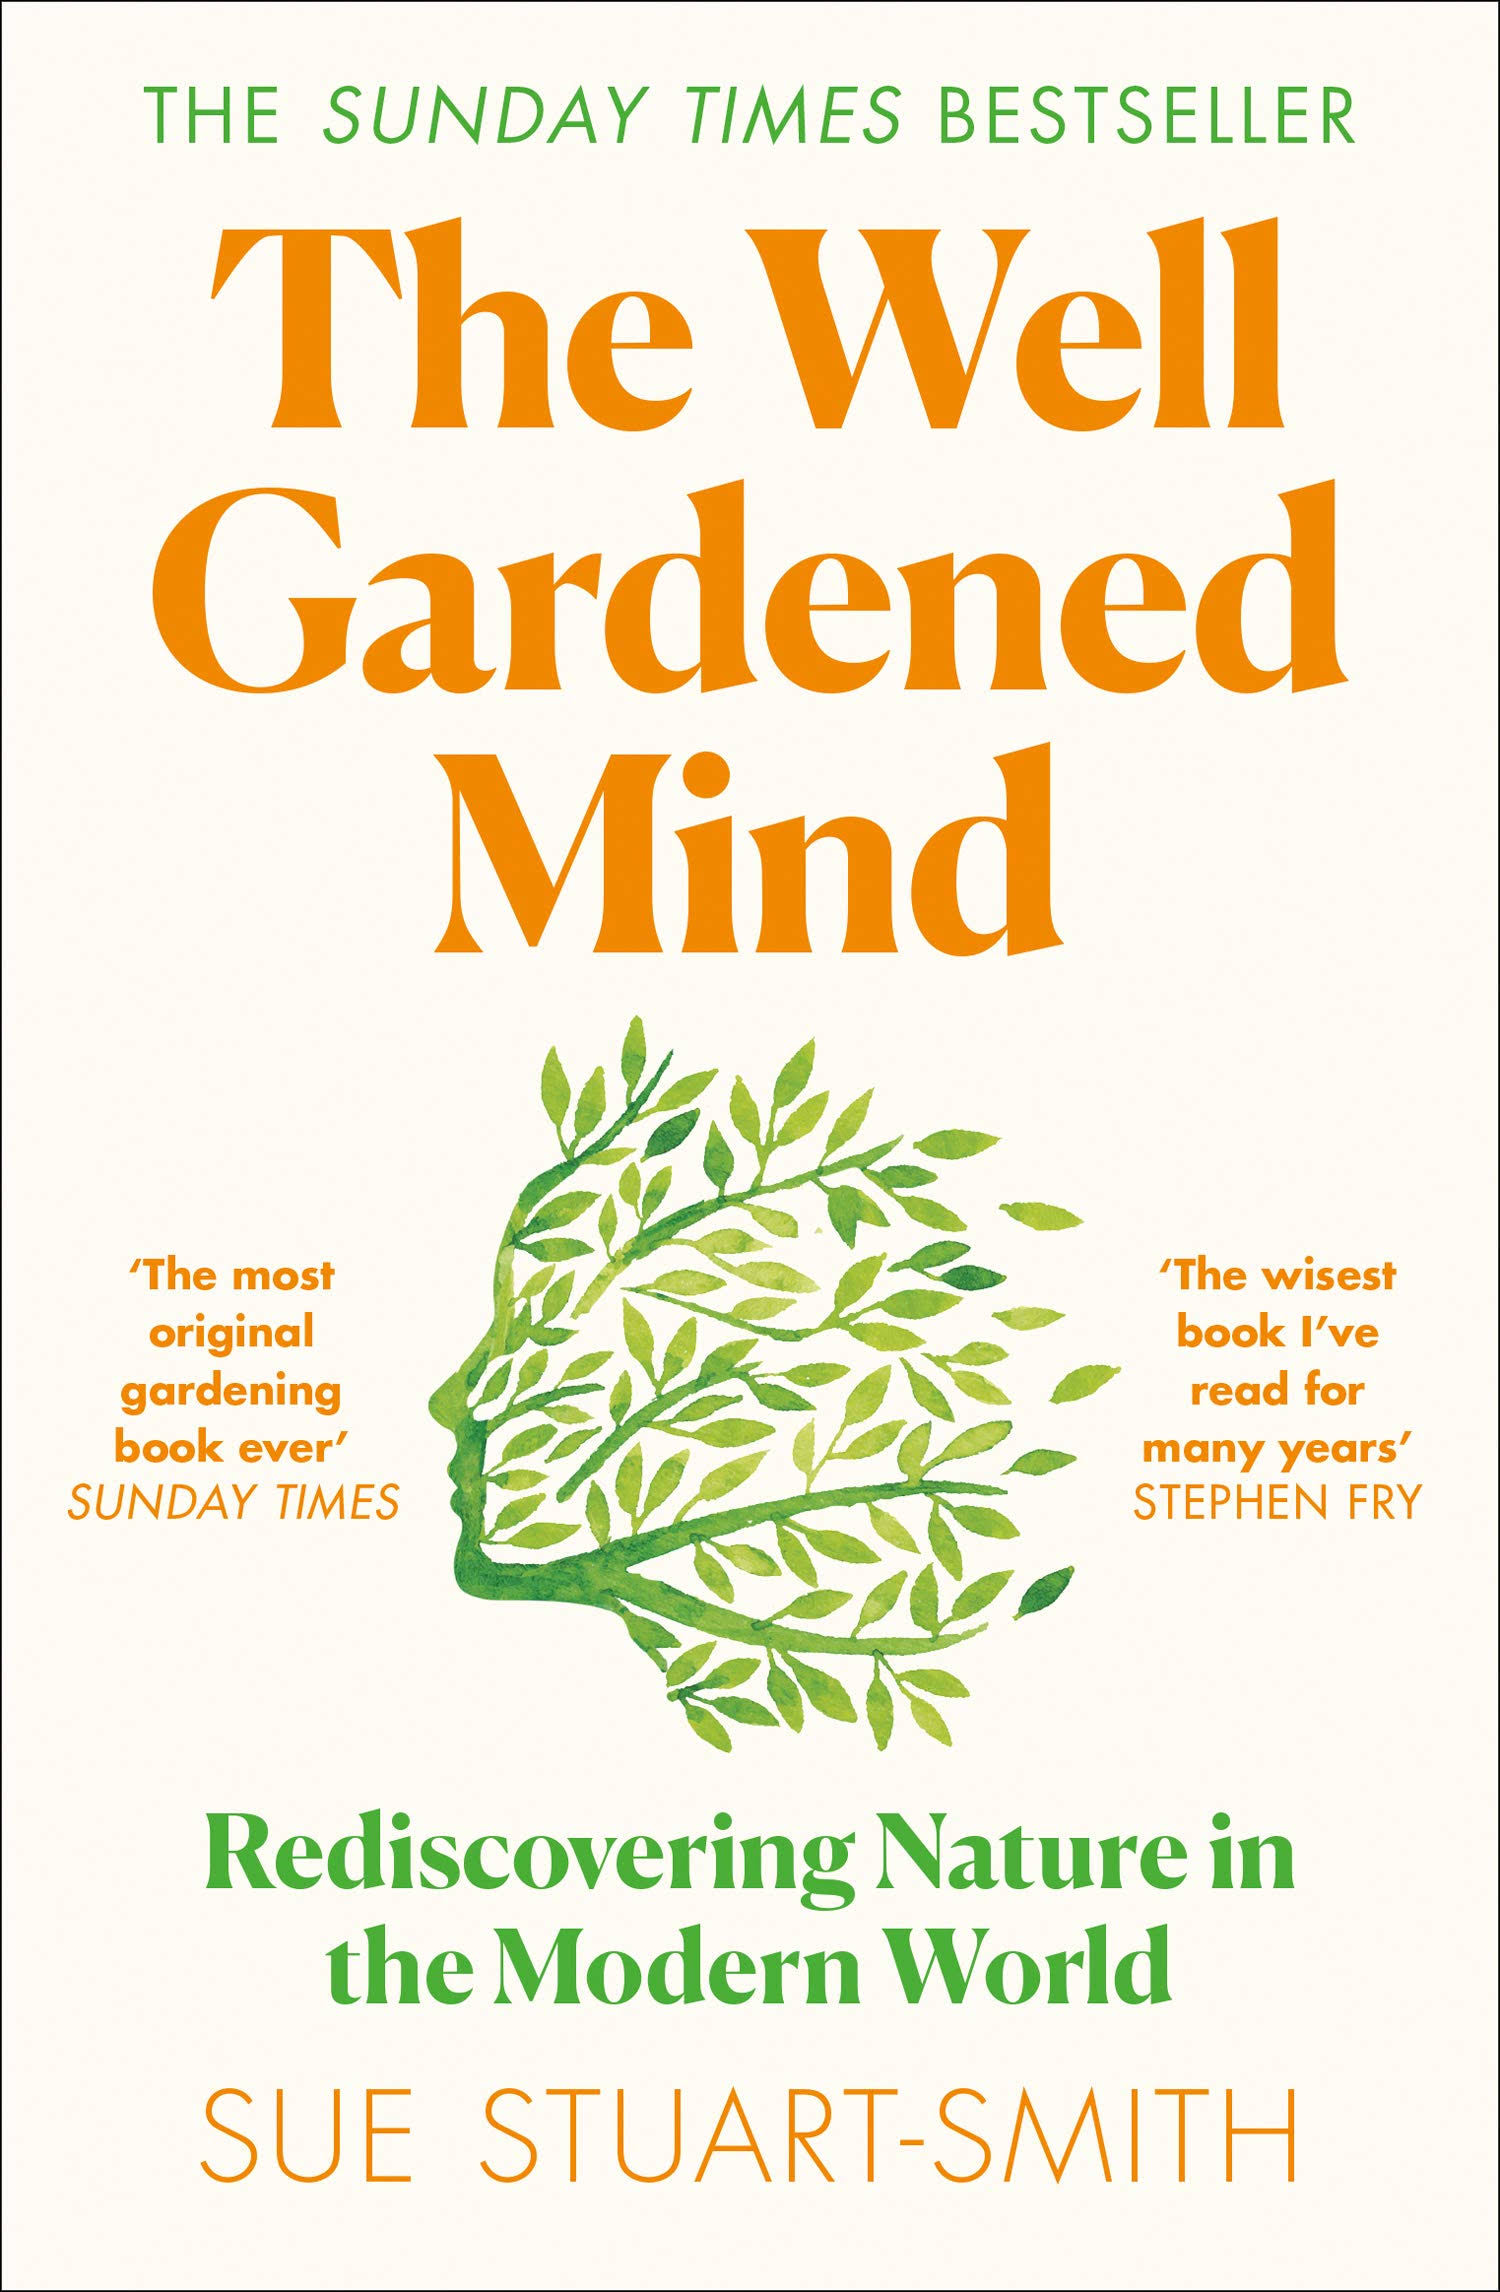 The Well Gardened Mind